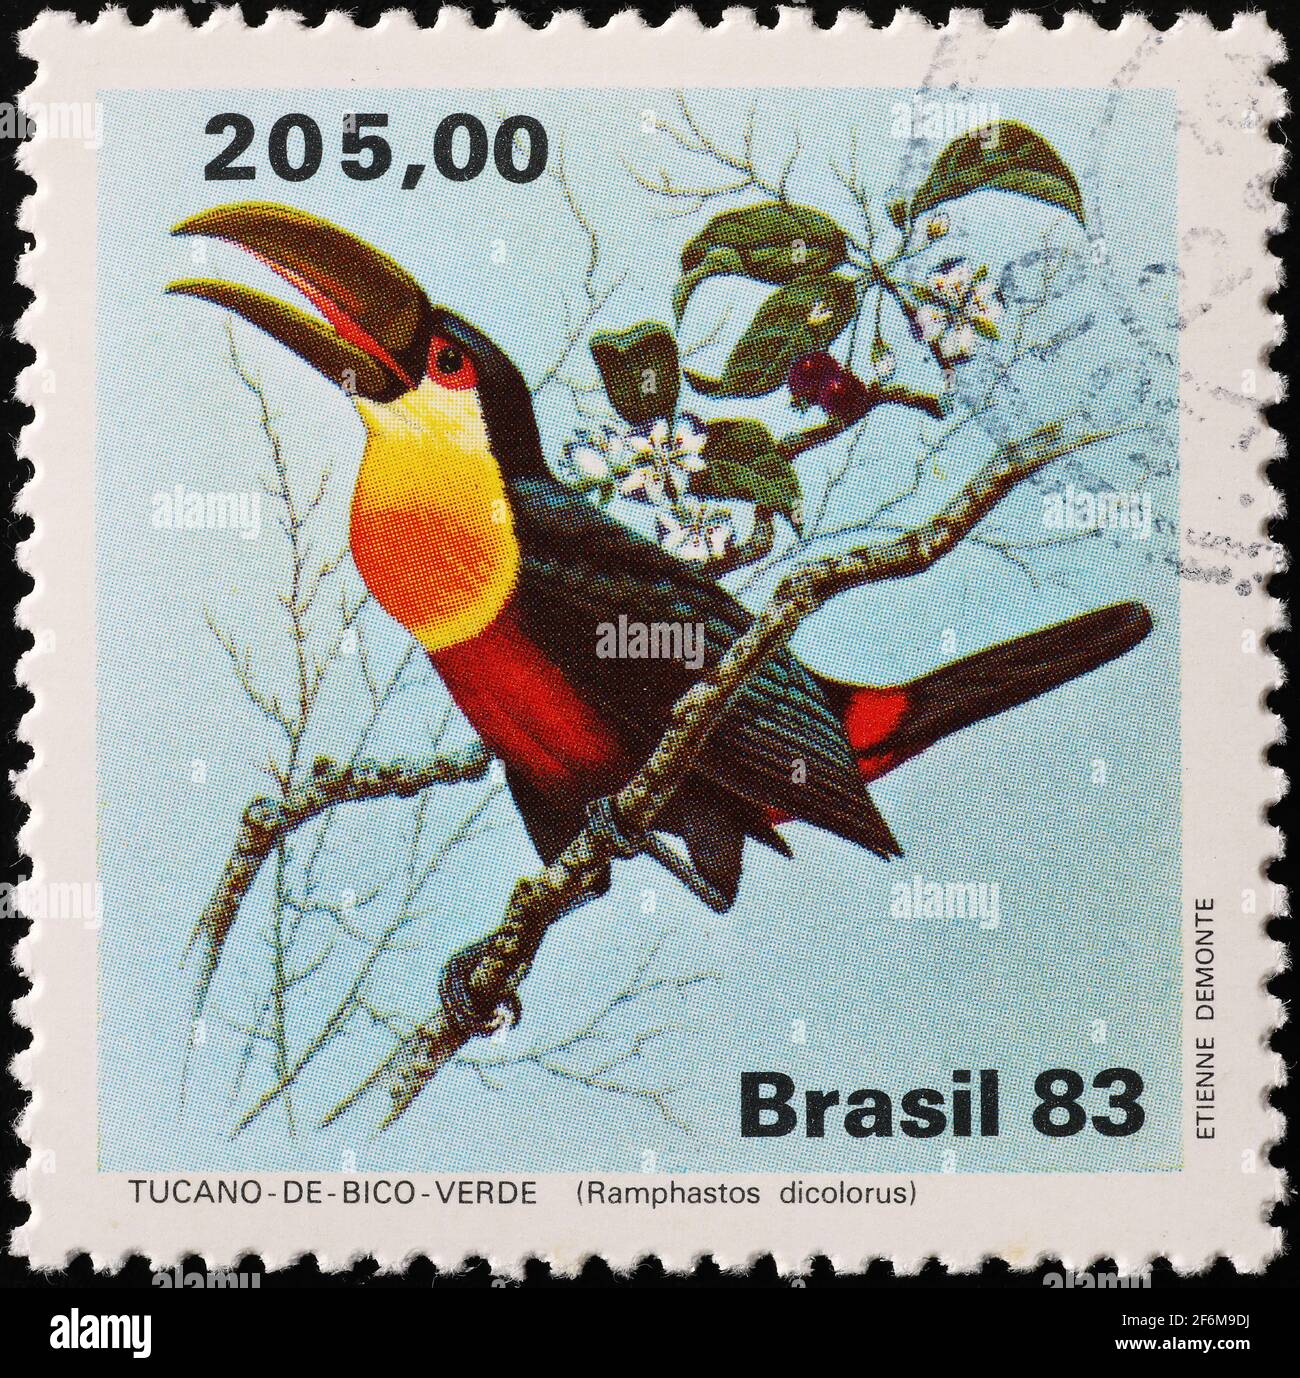 Green-billed toucan on brazilian postage stamp Stock Photo